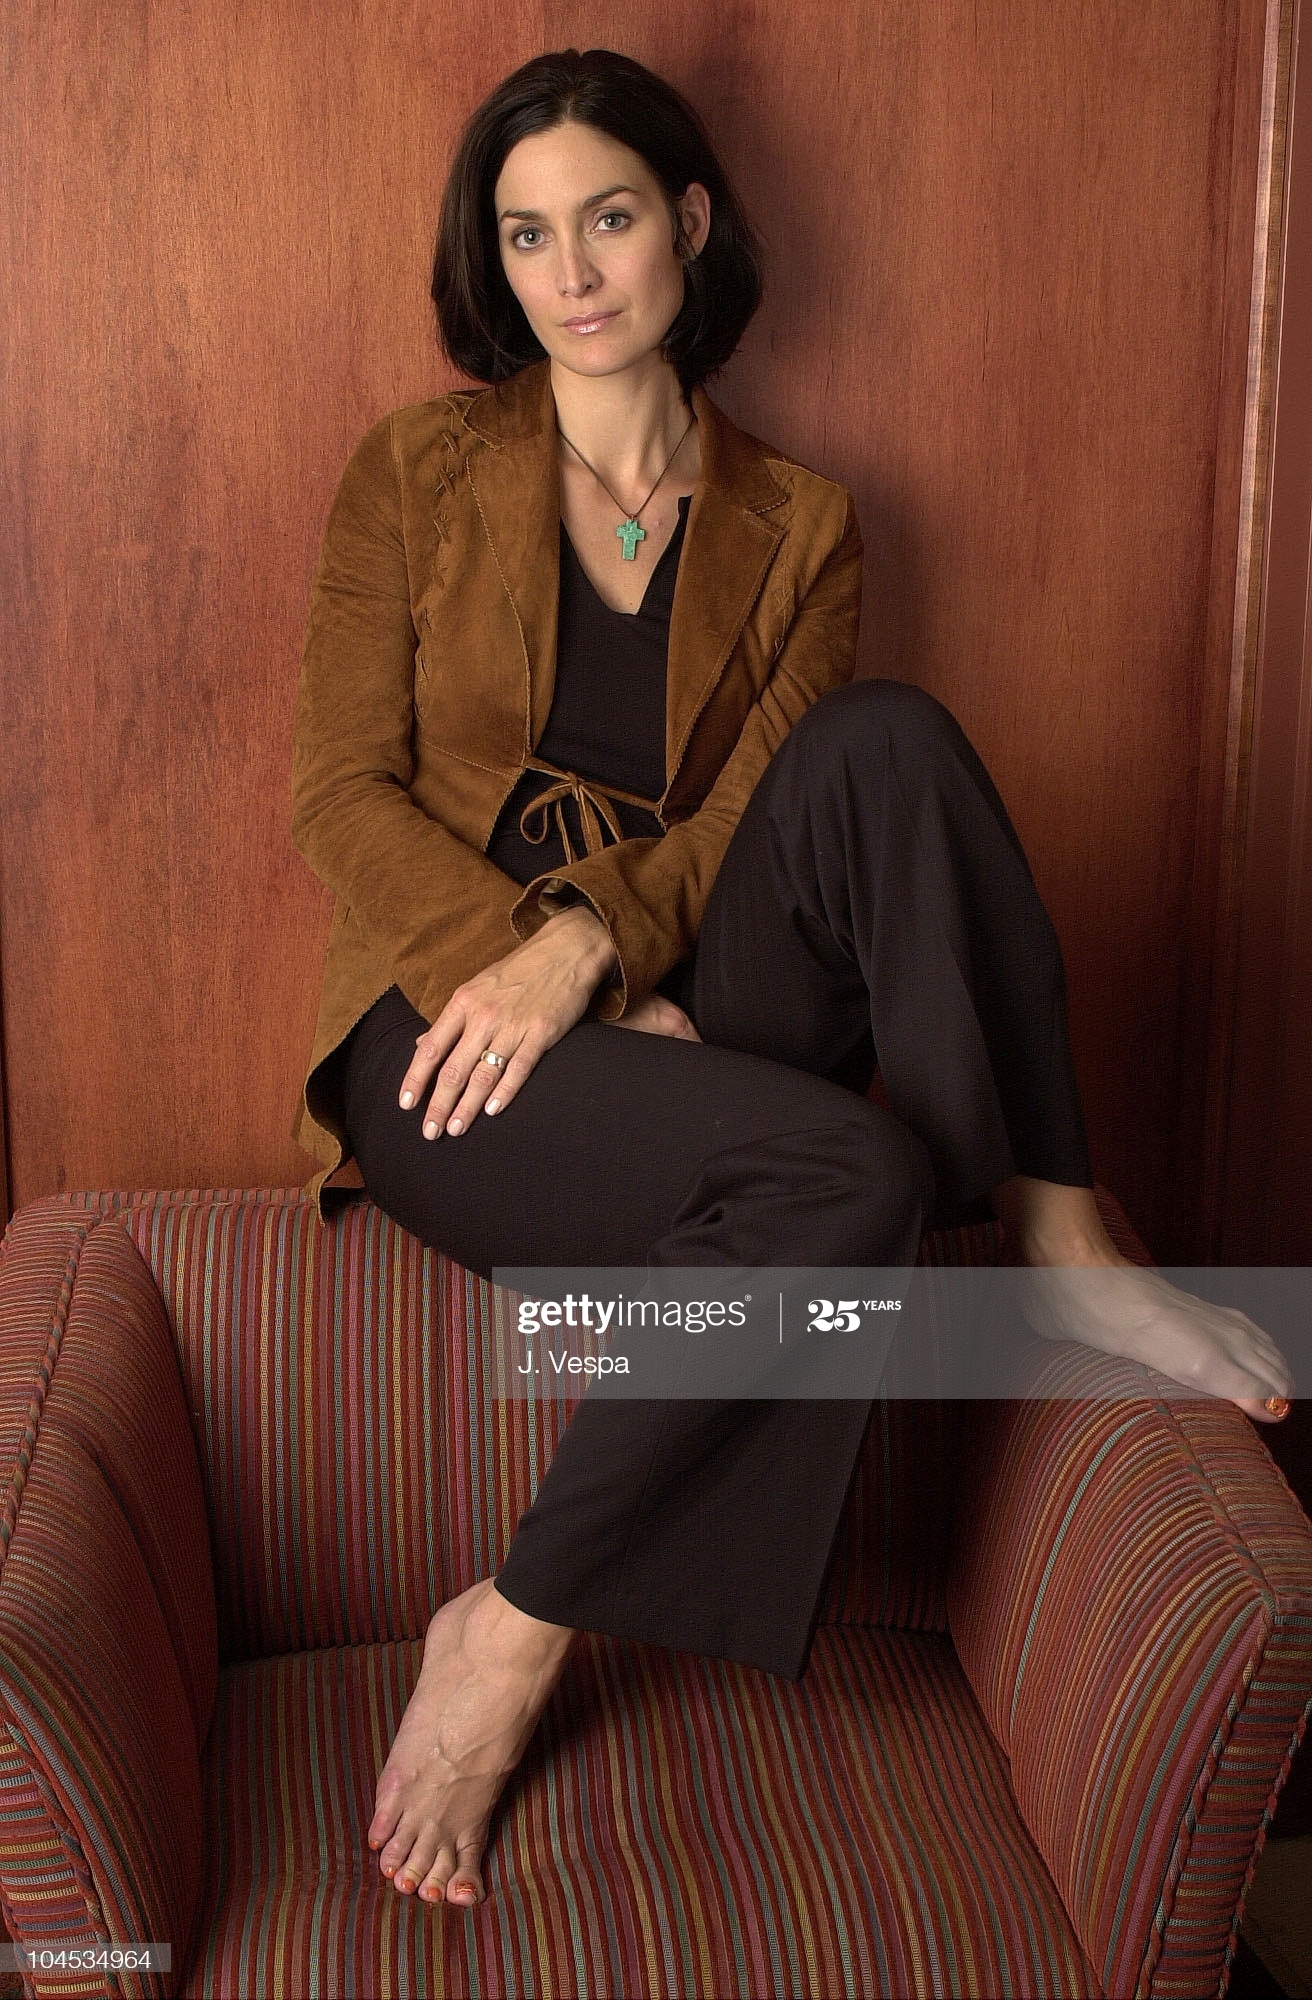 People who liked Carrie-Anne Moss's feet, also liked.